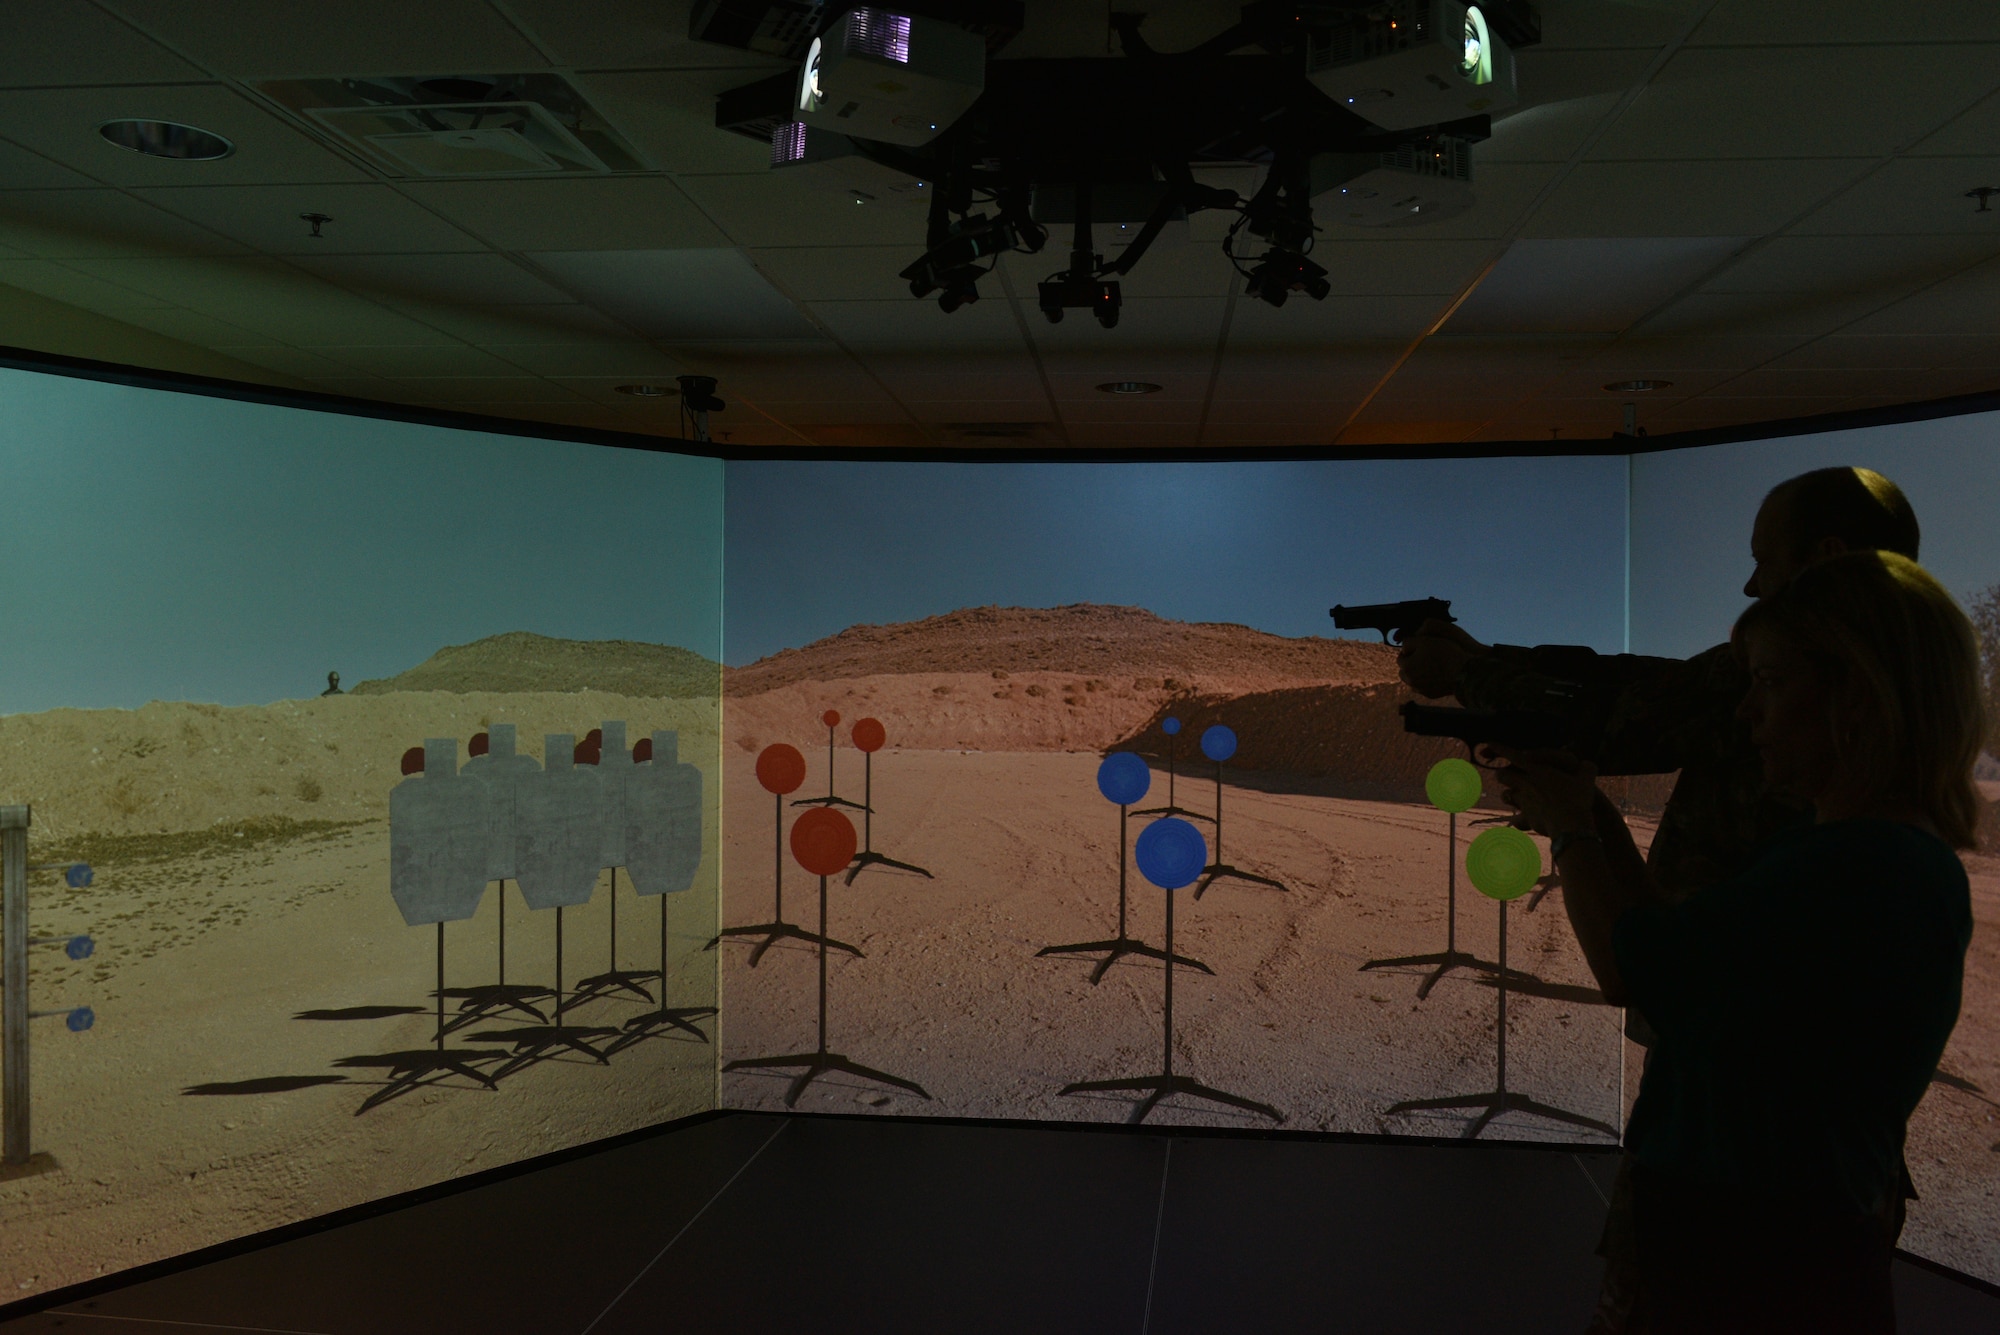 Brig Gen Doug Schiess, 45th Space Wing commander, and his wife, Debbie, partcipate in a Virtual Combat Arms Training and Maintenance exercise at Patrick Air Force Base, Fla., April 16, 2019. Schiess visited the 45th Security Forces Squadron to learn about new capabilites, and to be immersed in the 45th SFS mission. (U.S. Air Force photo by Airman 1st Class Dalton Williams)